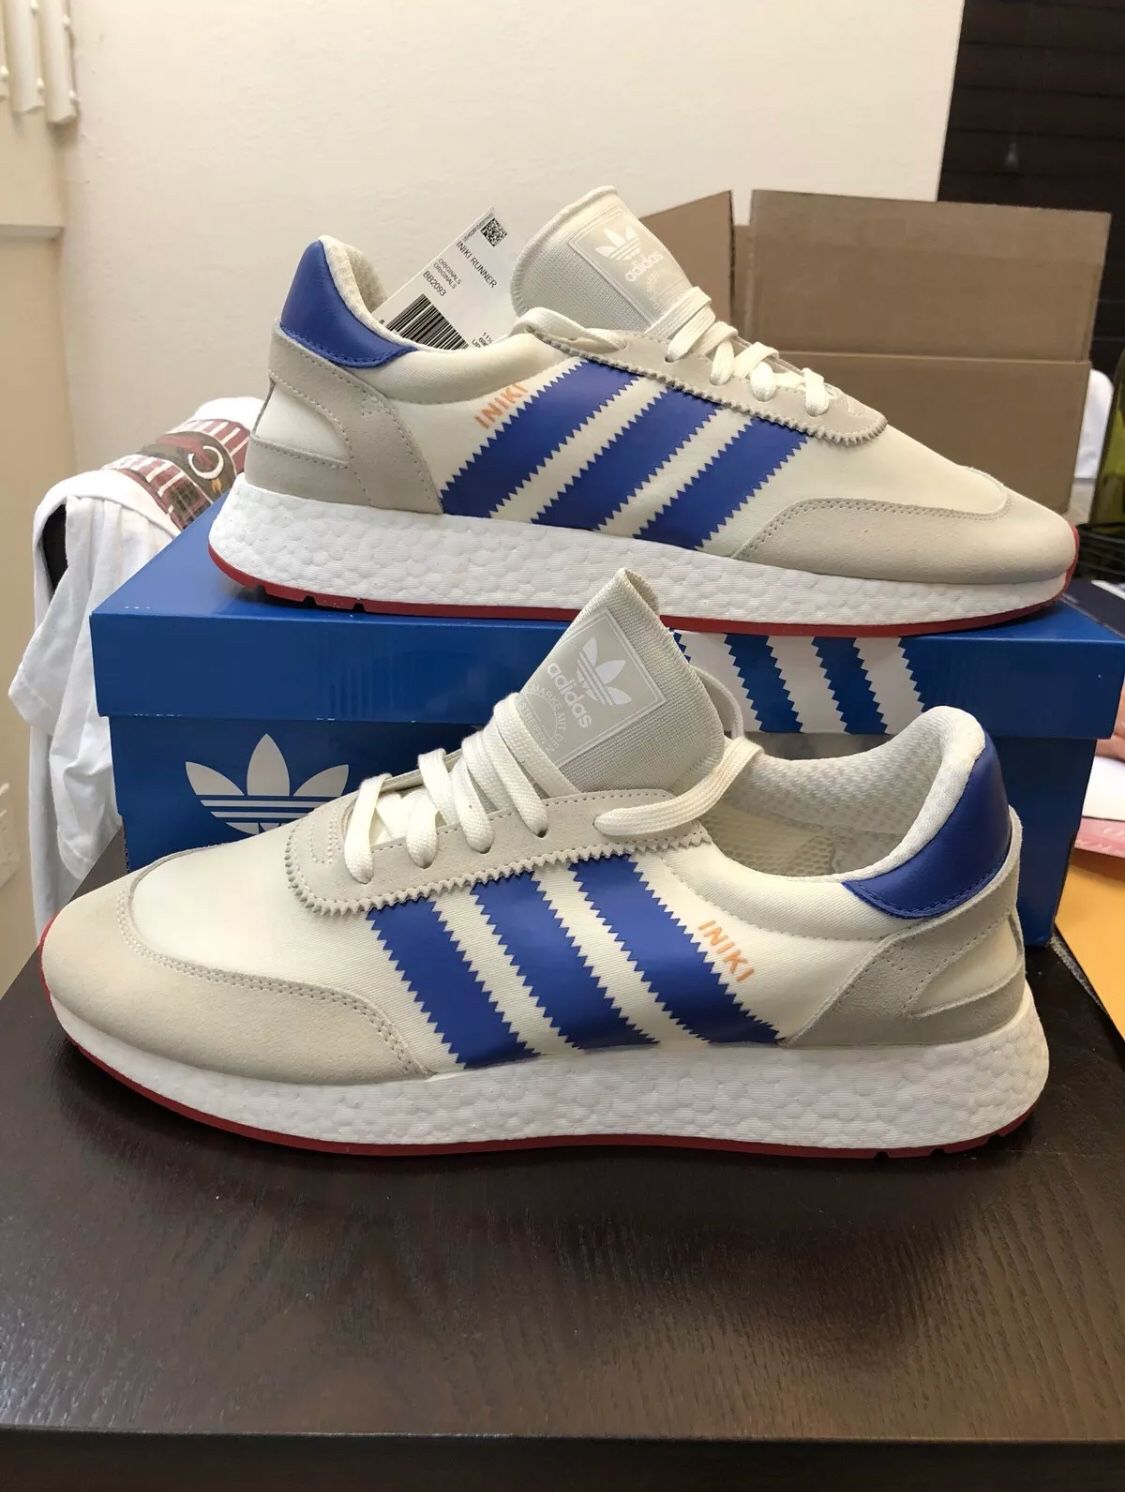 Men's ADIDAS Iniki Runner Pride of the USA BB2093 Off White / Collegiate Royal Core Red Size 12 Shoes New w/ Box for Sale in Plantation, FL OfferUp